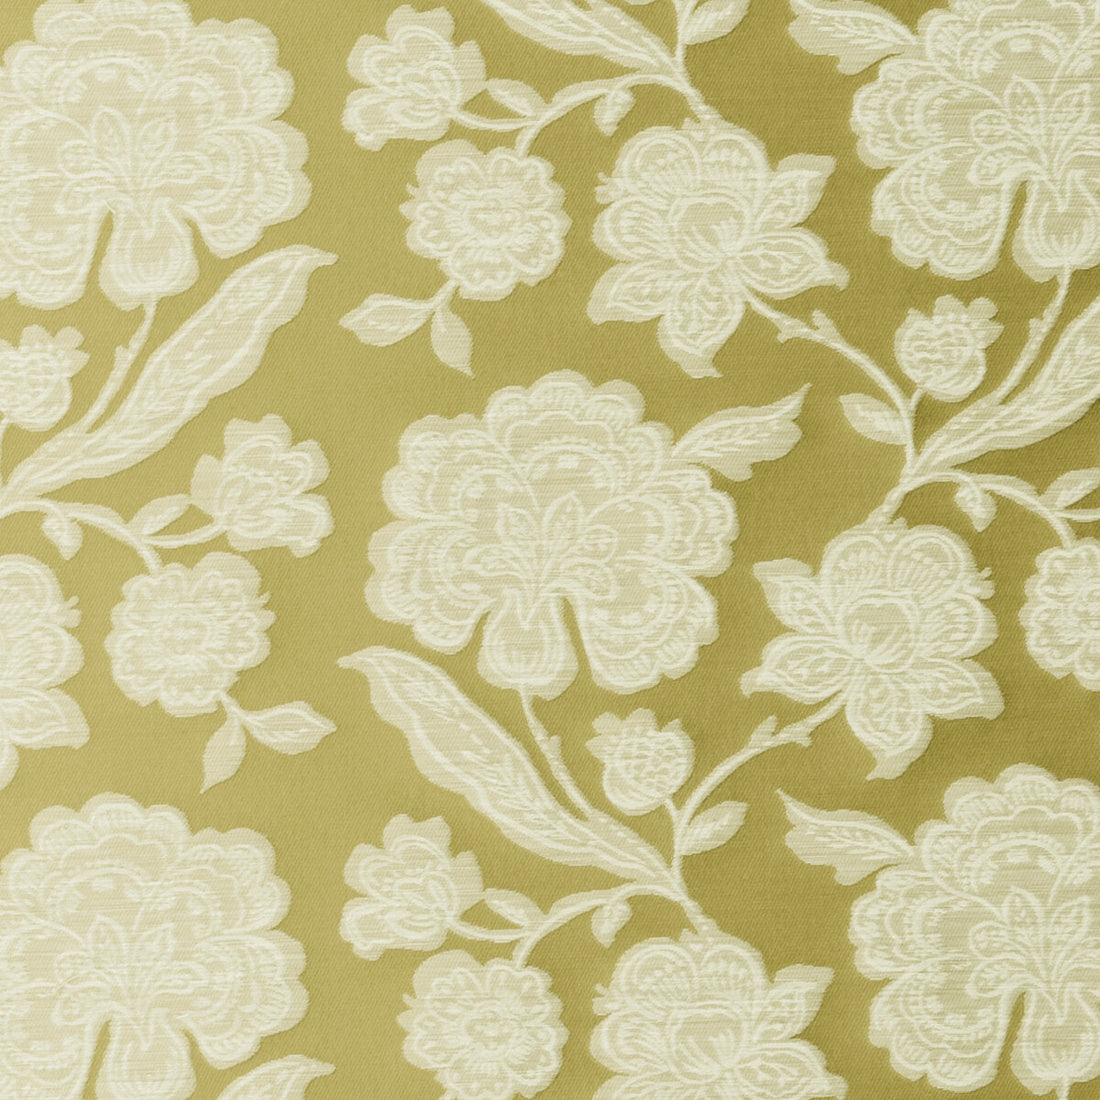 Downham fabric in citrus color - pattern F0598/01.CAC.0 - by Clarke And Clarke in the Clarke &amp; Clarke Ribble Valley collection